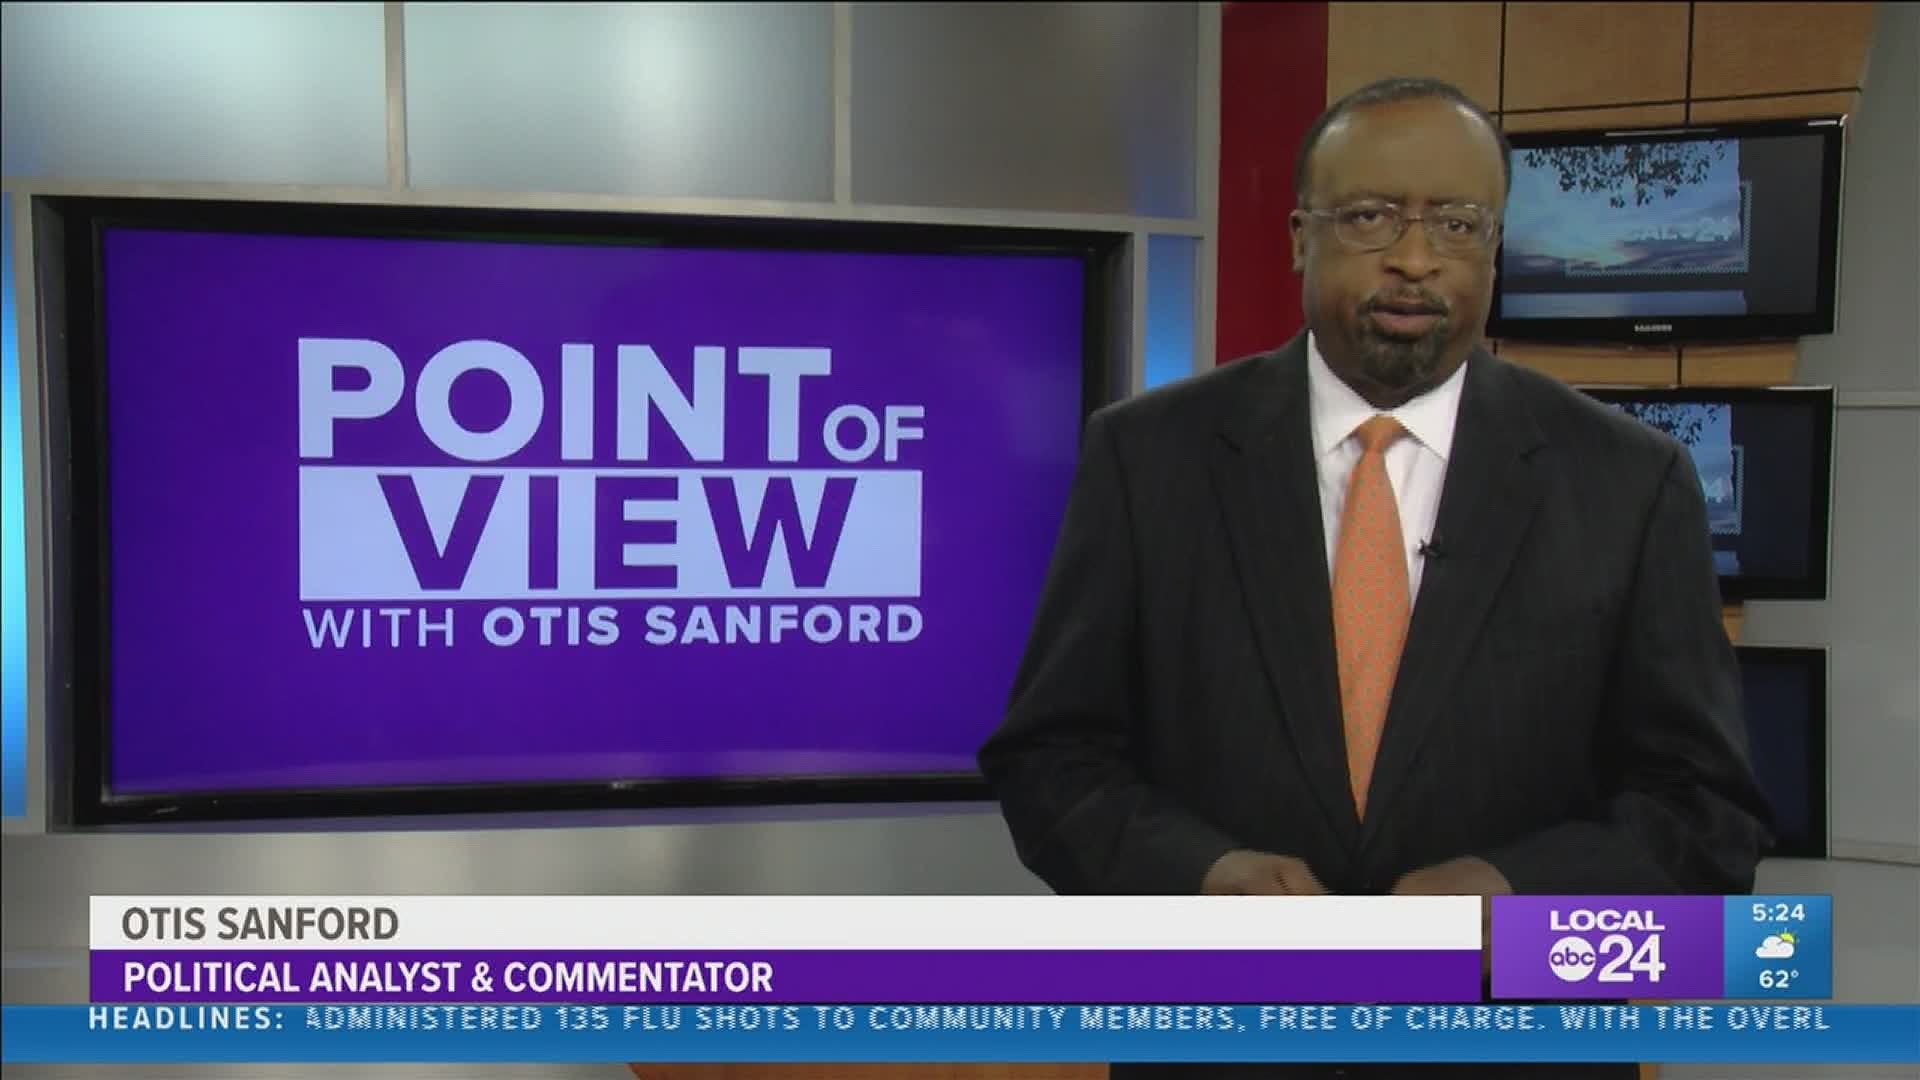 Local 24 News political analyst and commentator Otis Sanford shares his point of view on the search for a new Memphis Police Director.